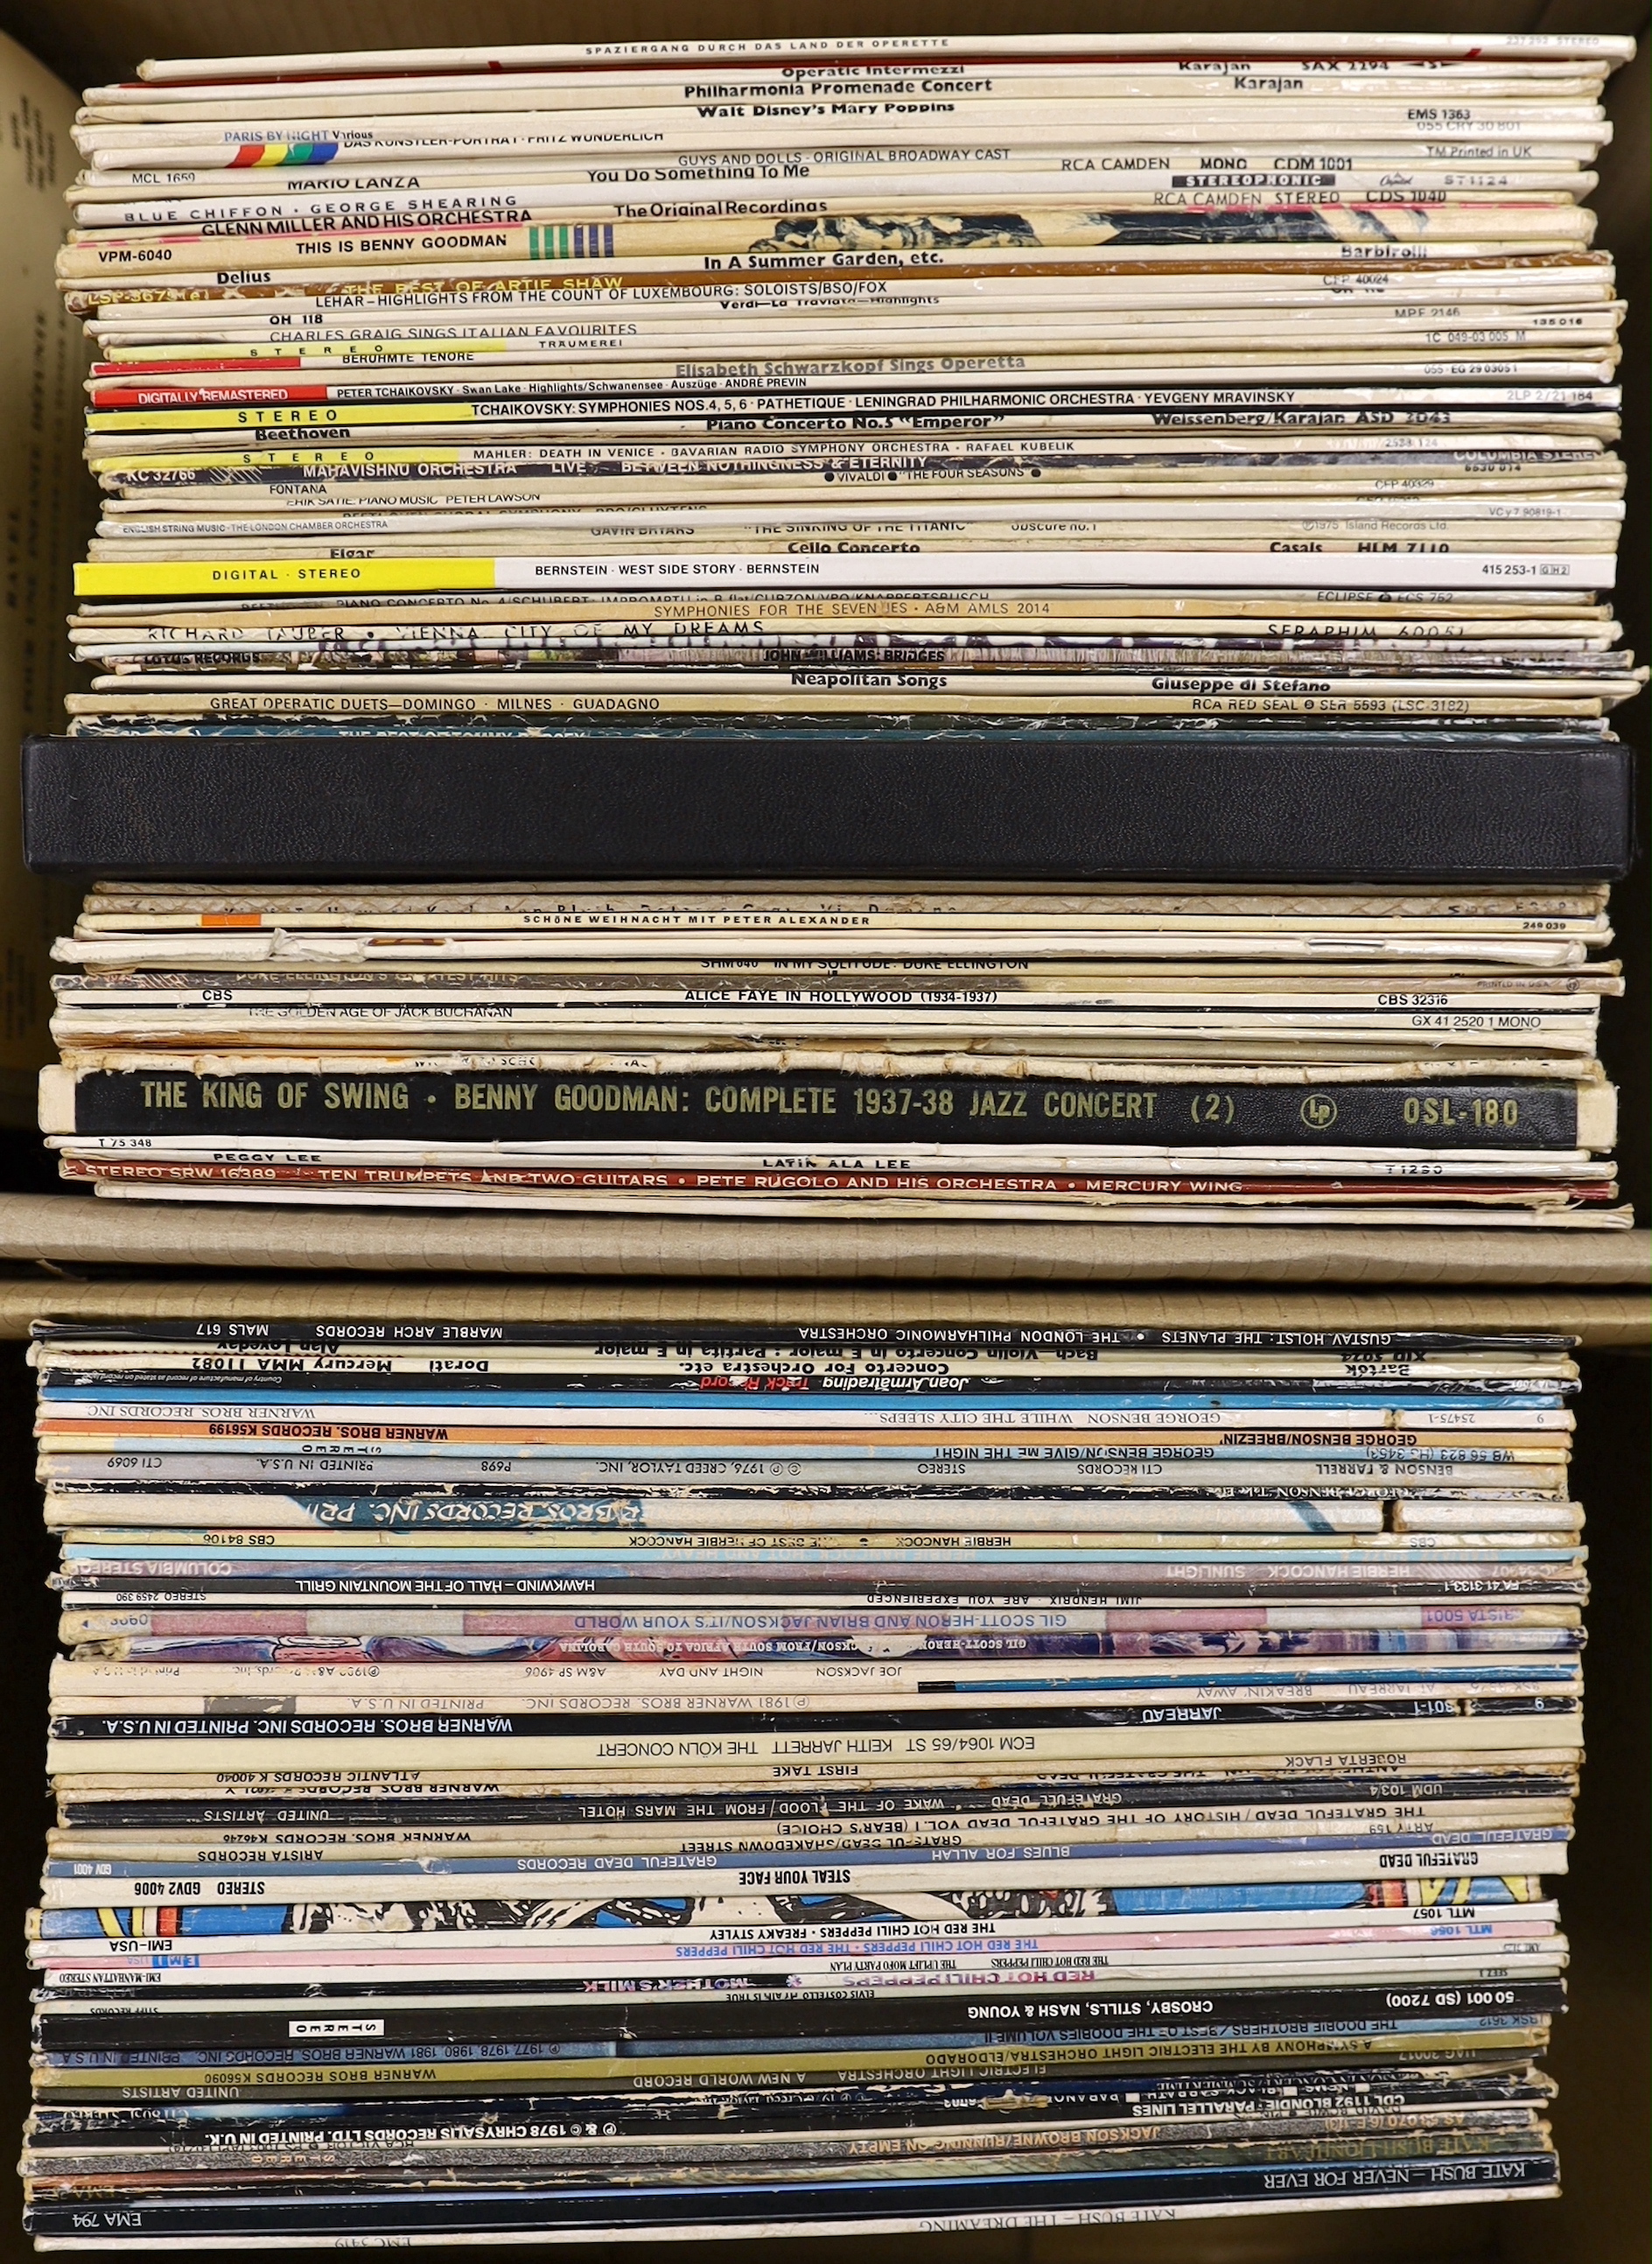 Forty-two mainly 1970's-80's LPs including, Kate Bush, David Bowie, Black Sabbath, ELO, Crosby, Stills, Nash & Young, Red Hot Chili Peppers, Grateful Dead, Jimi Hendrix, Hawkwind, Herbie Hancock, George Benson, etc.